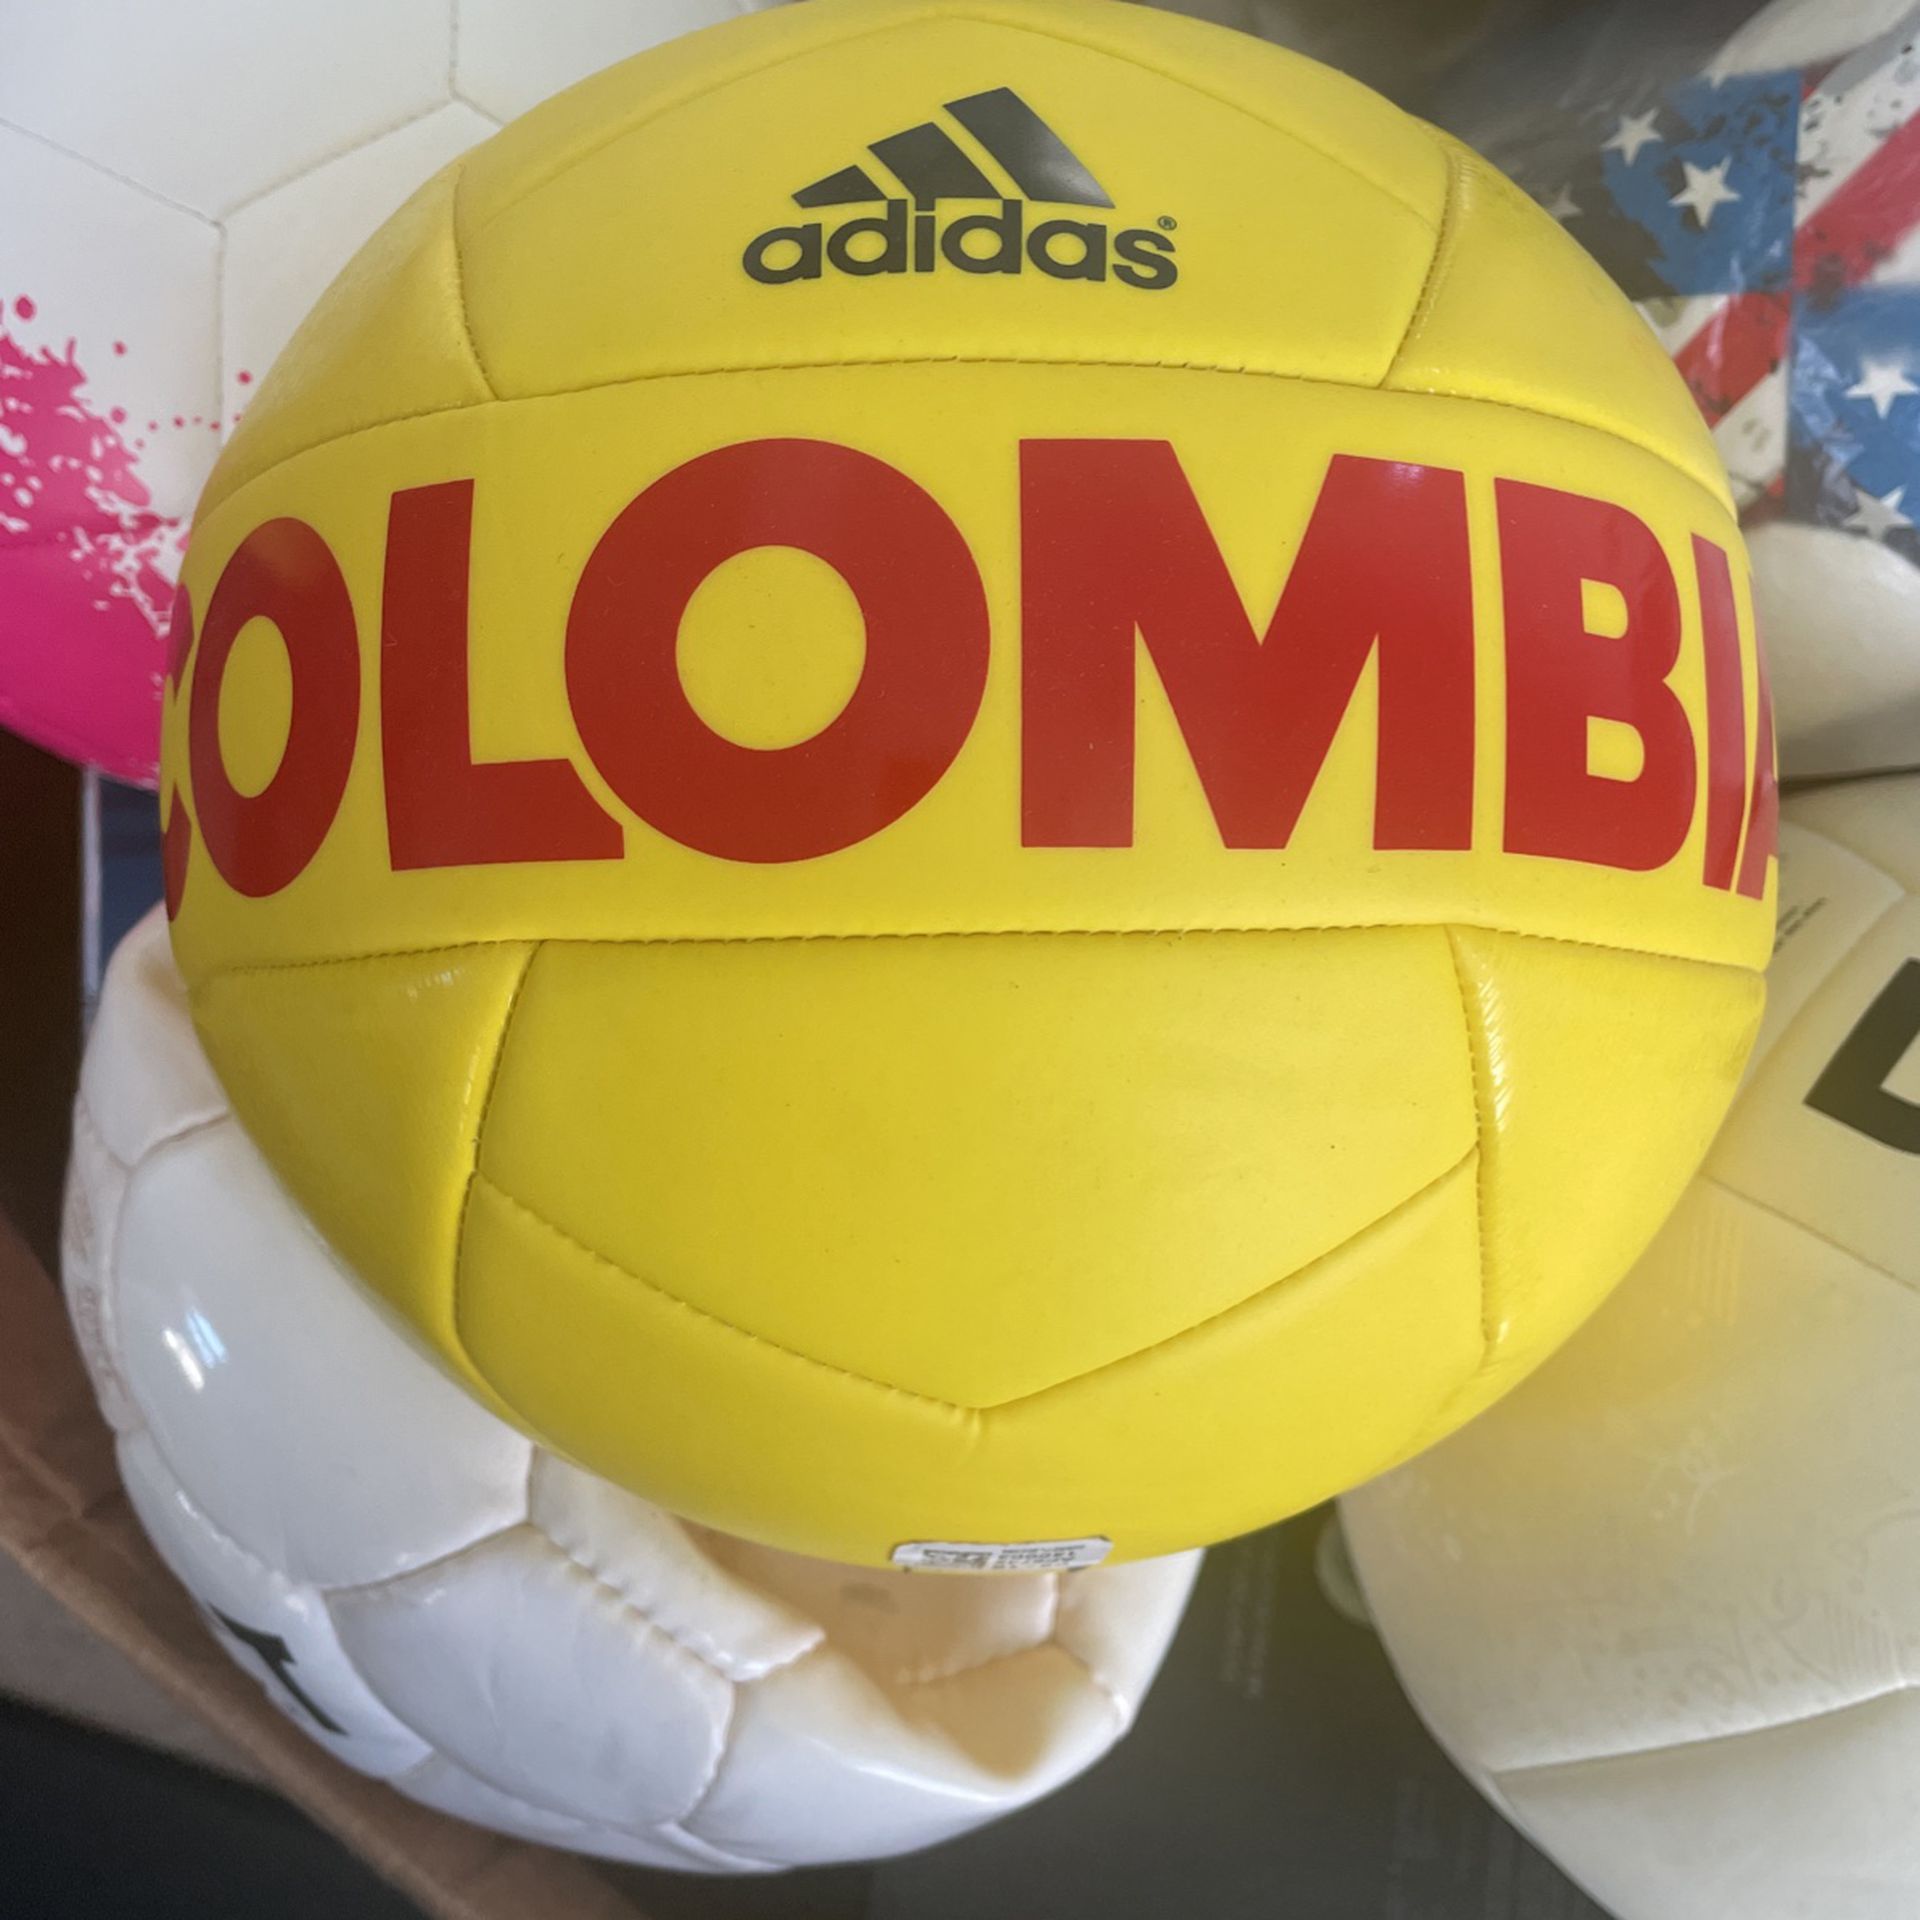 Adidas Colombia Soccer Ball Size 5